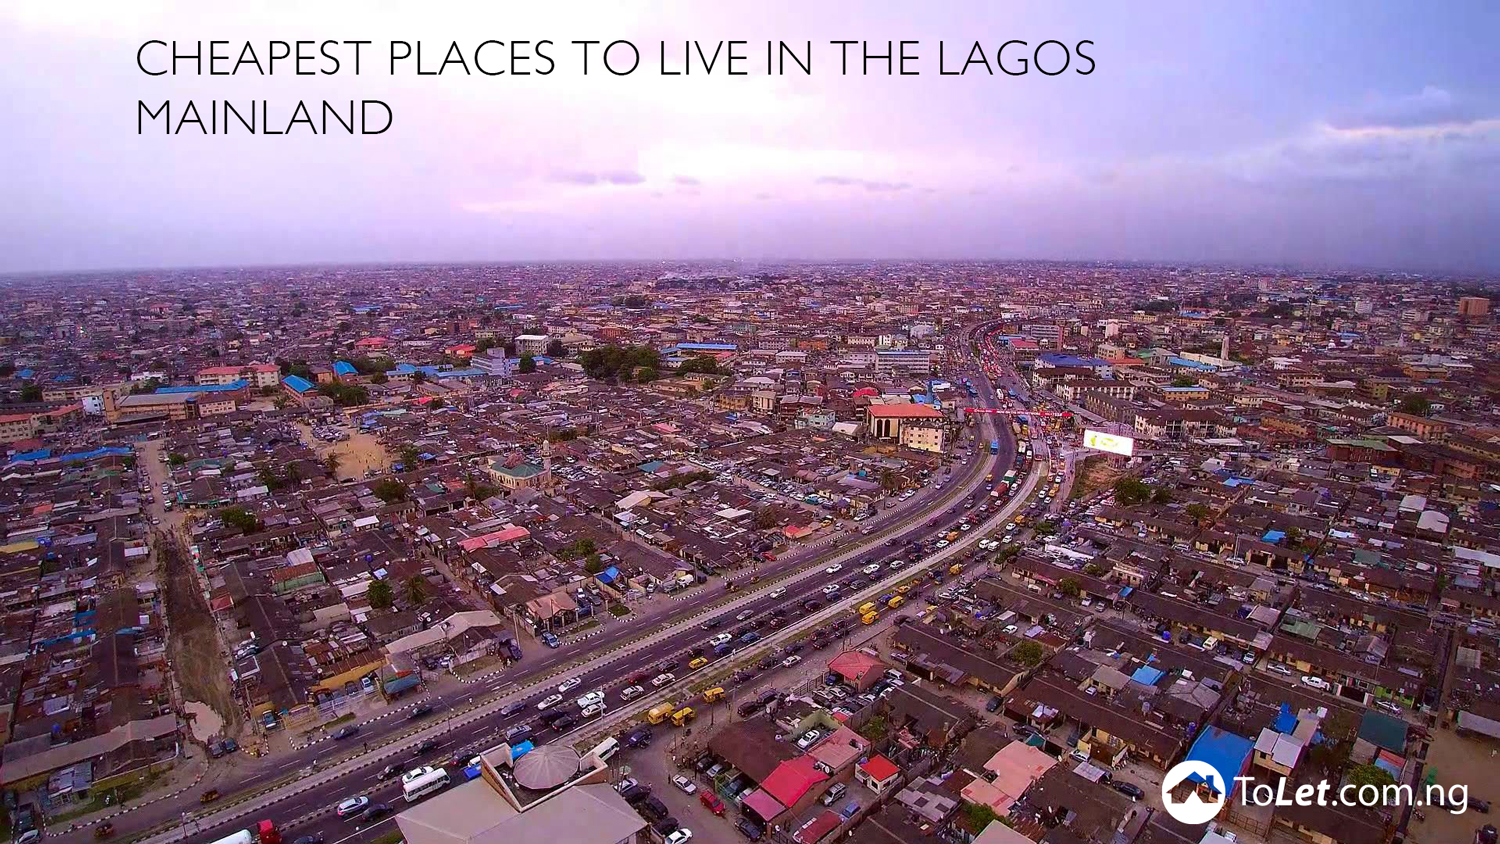 CHEAPEST PLACES TO LIVE IN THE LAGOS MAINLAND